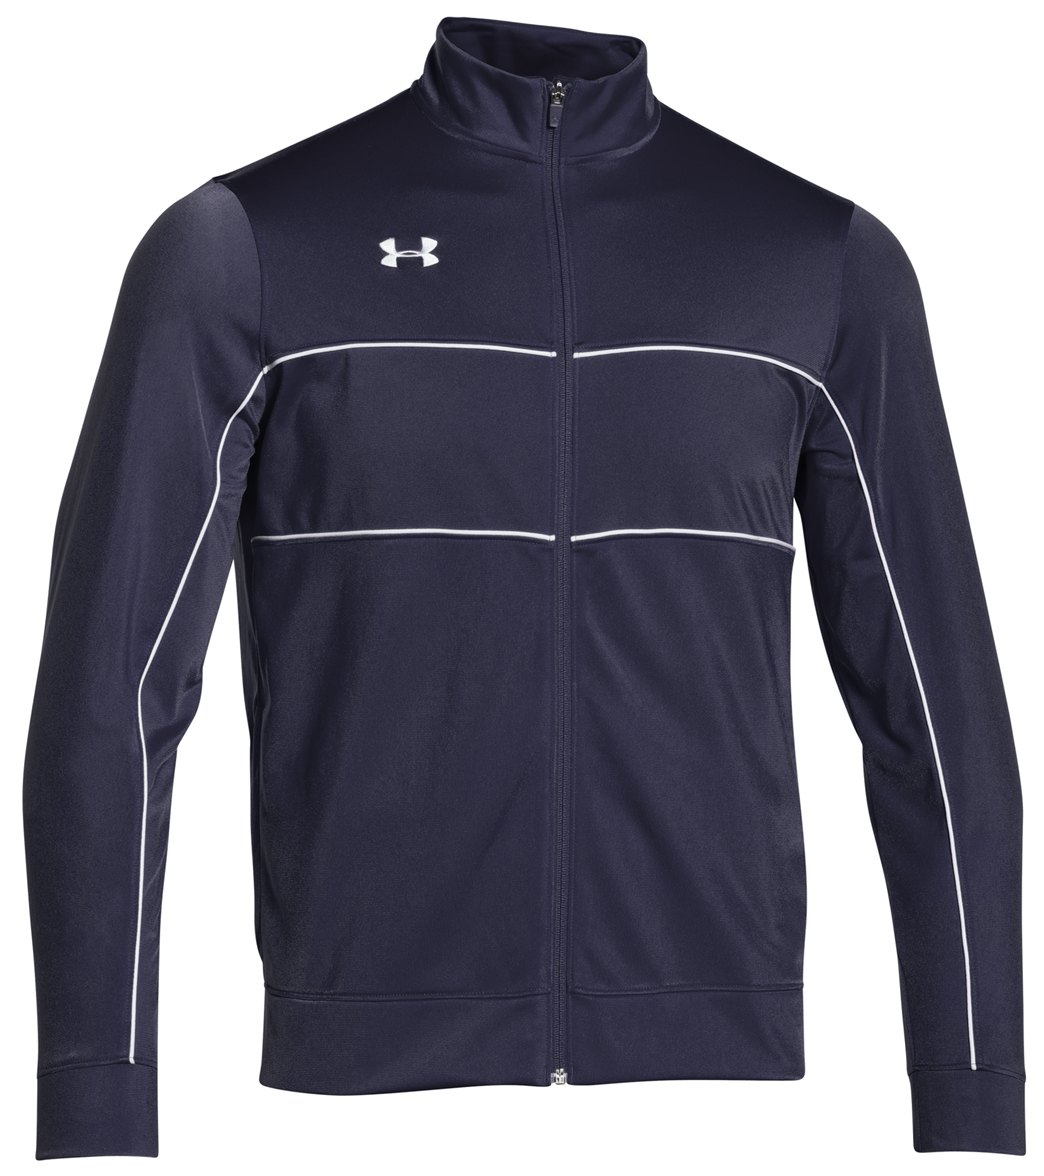 Under Armour Men's Rival Knit Warm-Up Jacket at SwimOutlet.com - Free ...